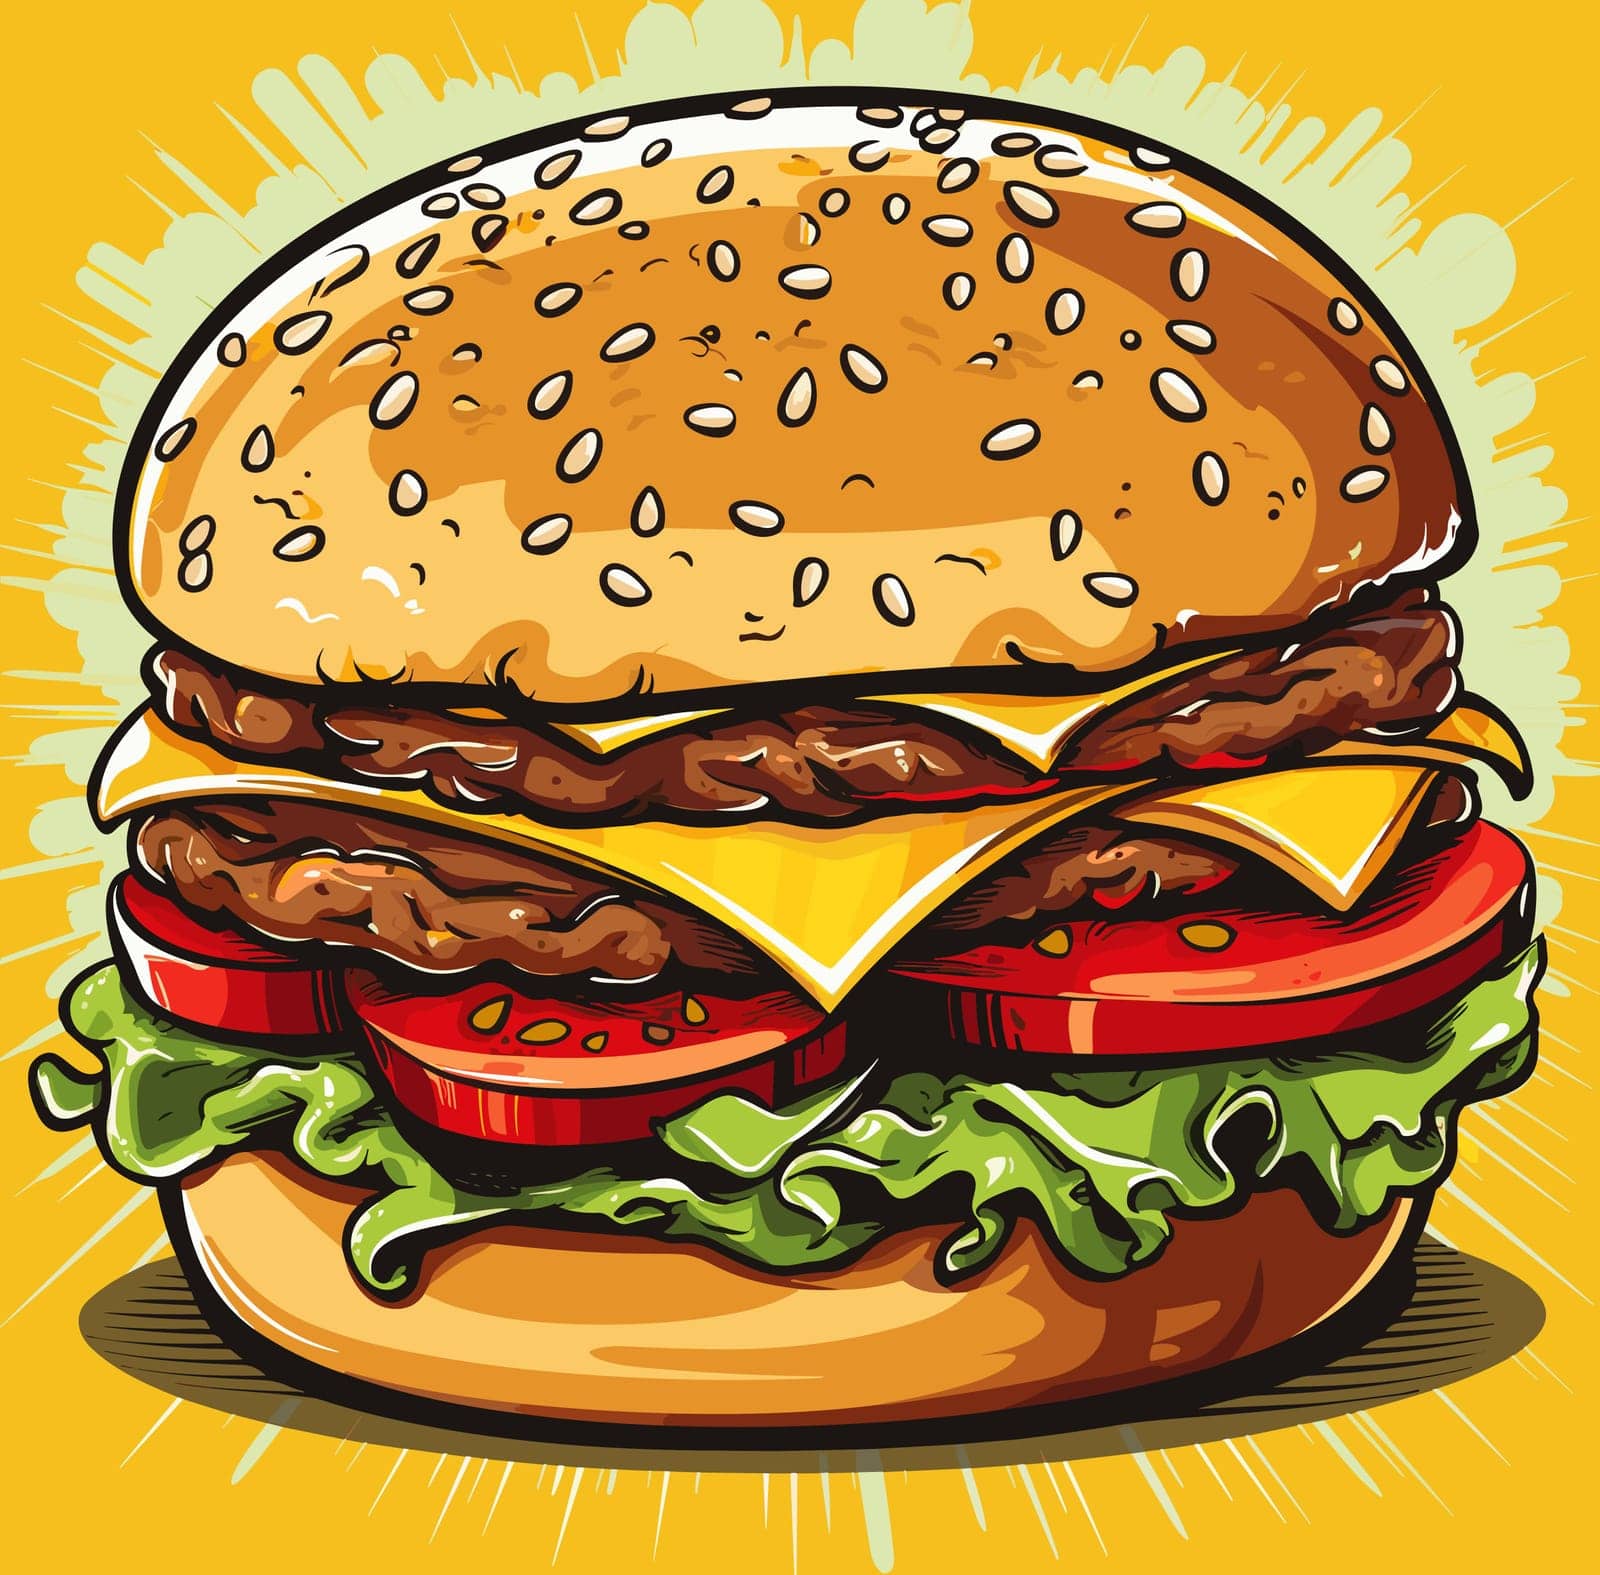 A large hamburger with two patties, greens, and cheese, presented in a vibrant pop art illustration